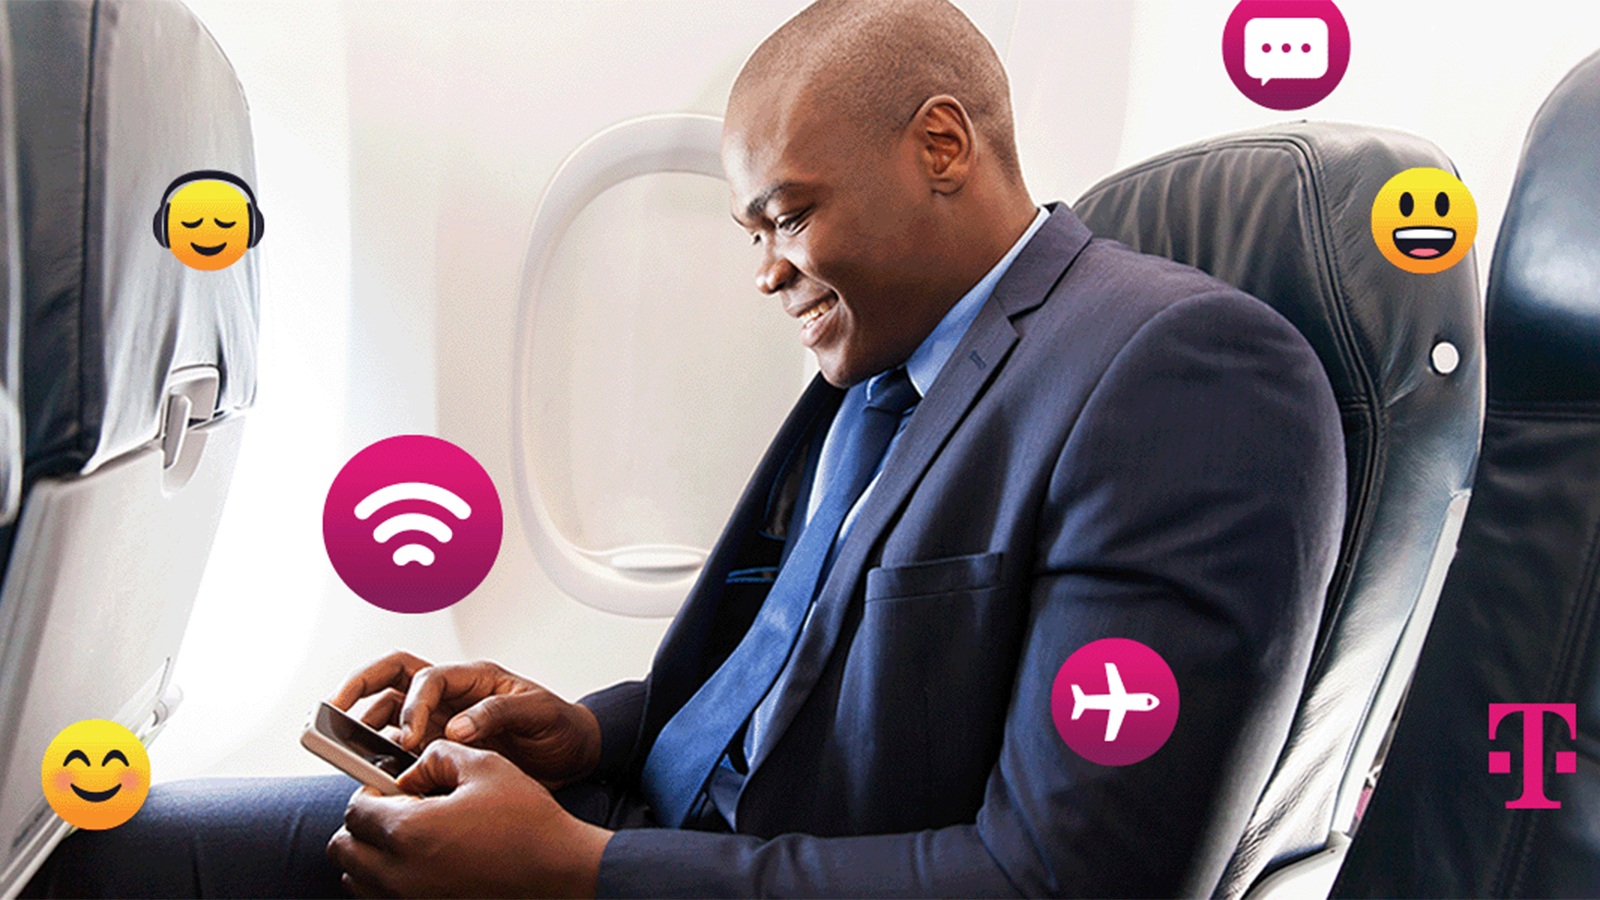 T-Mobile and Delta Air Lines Join Forces to Deliver Free In-flight Wi-Fi